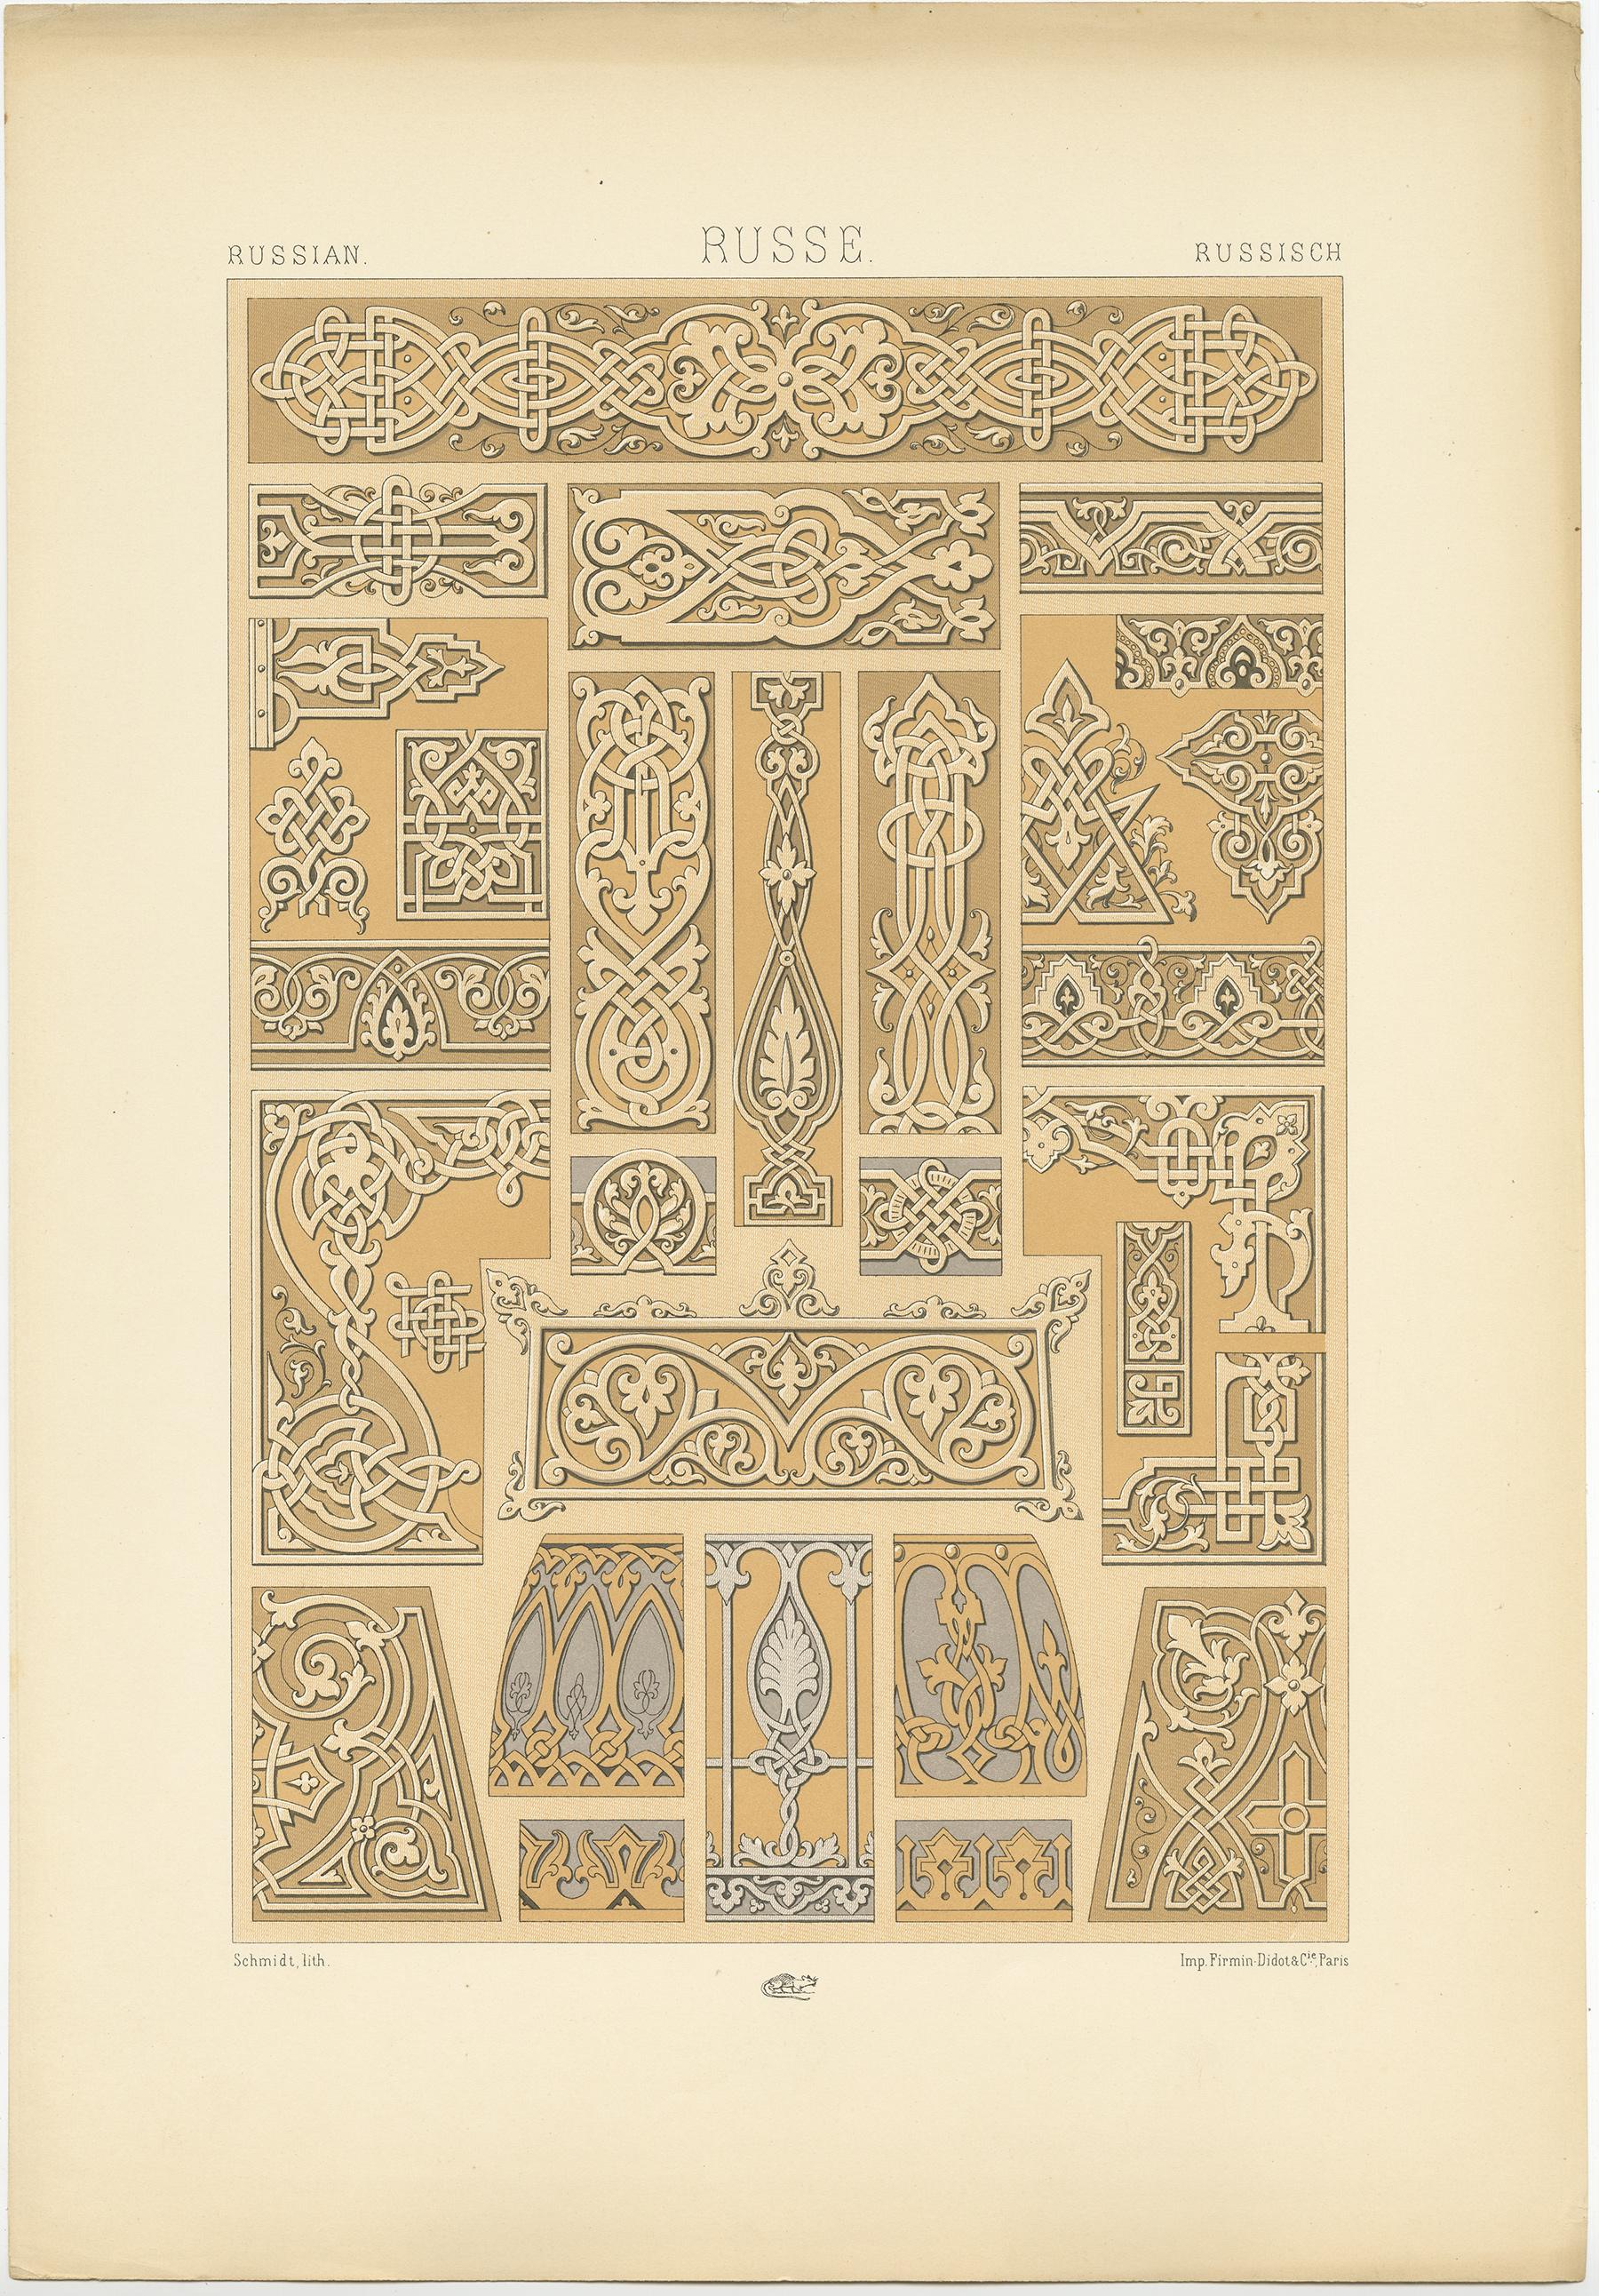 Antique print titled 'Russian - Russe - Russische'. Chromolithograph of motifs from metalwork and manuscripts ornaments. This print originates from 'l'Ornement Polychrome' by Auguste Racinet. Published circa 1890.